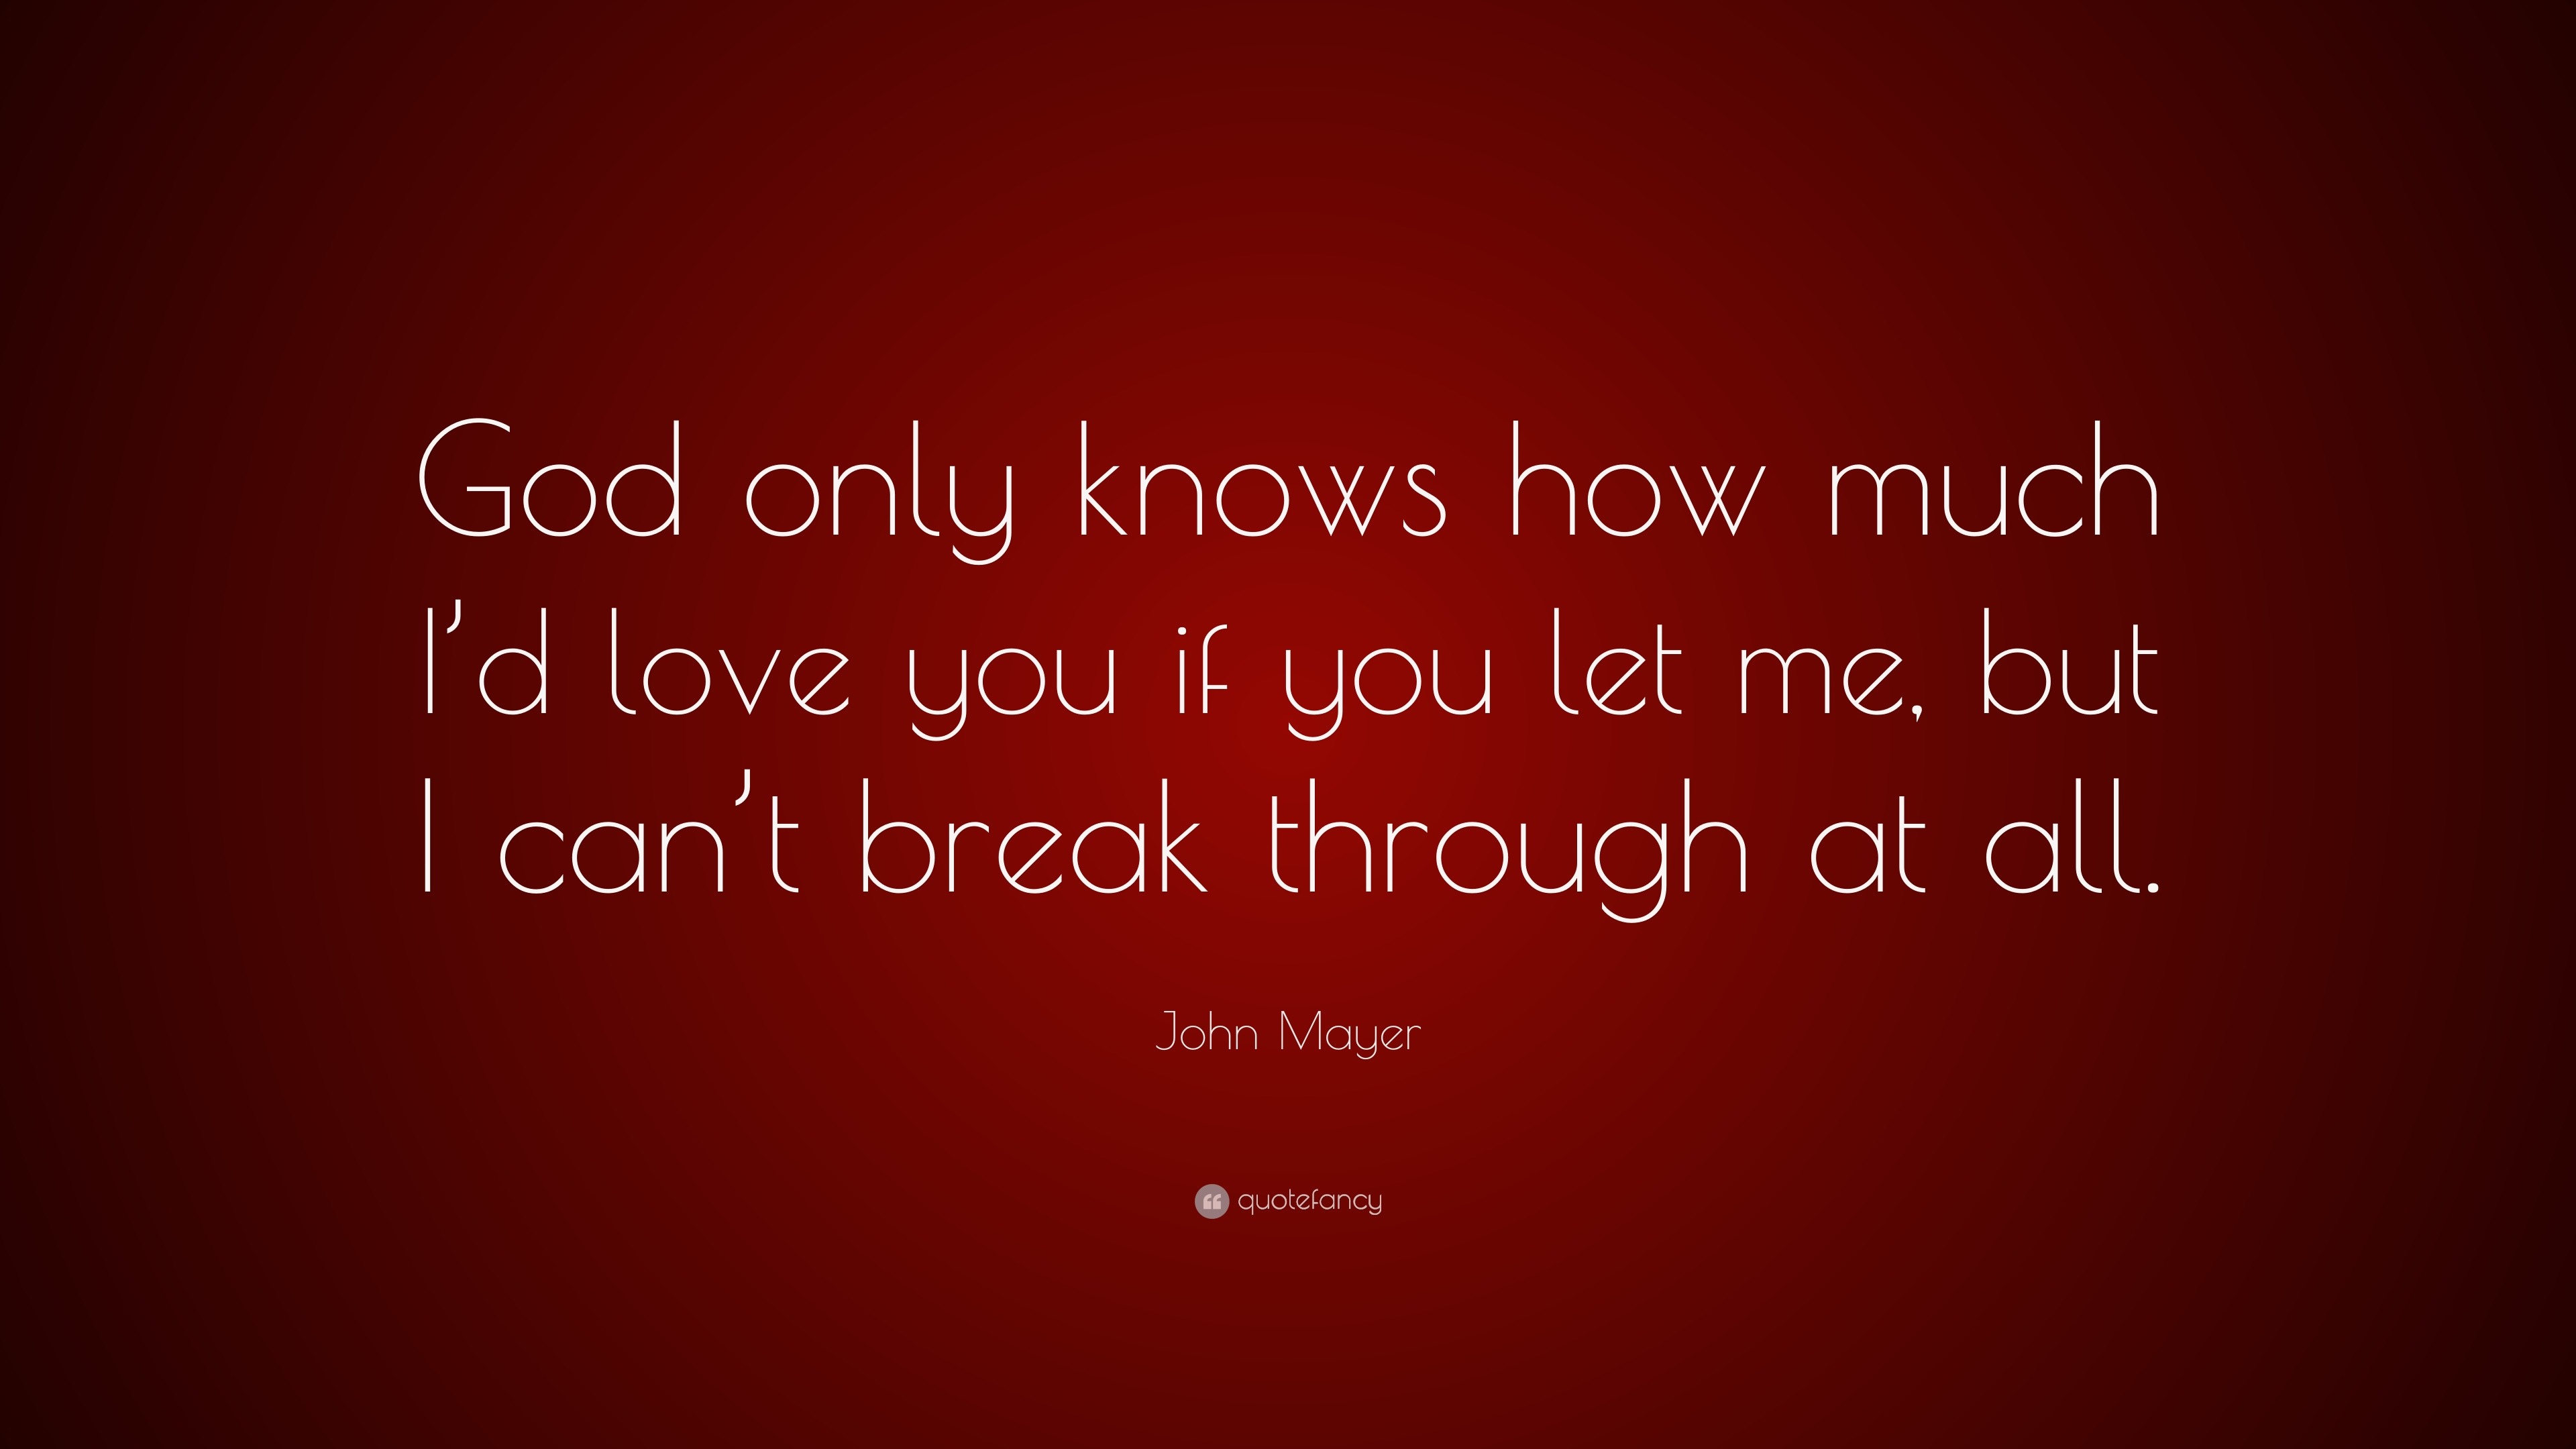 John Mayer Quote “God only knows how much I d love you if